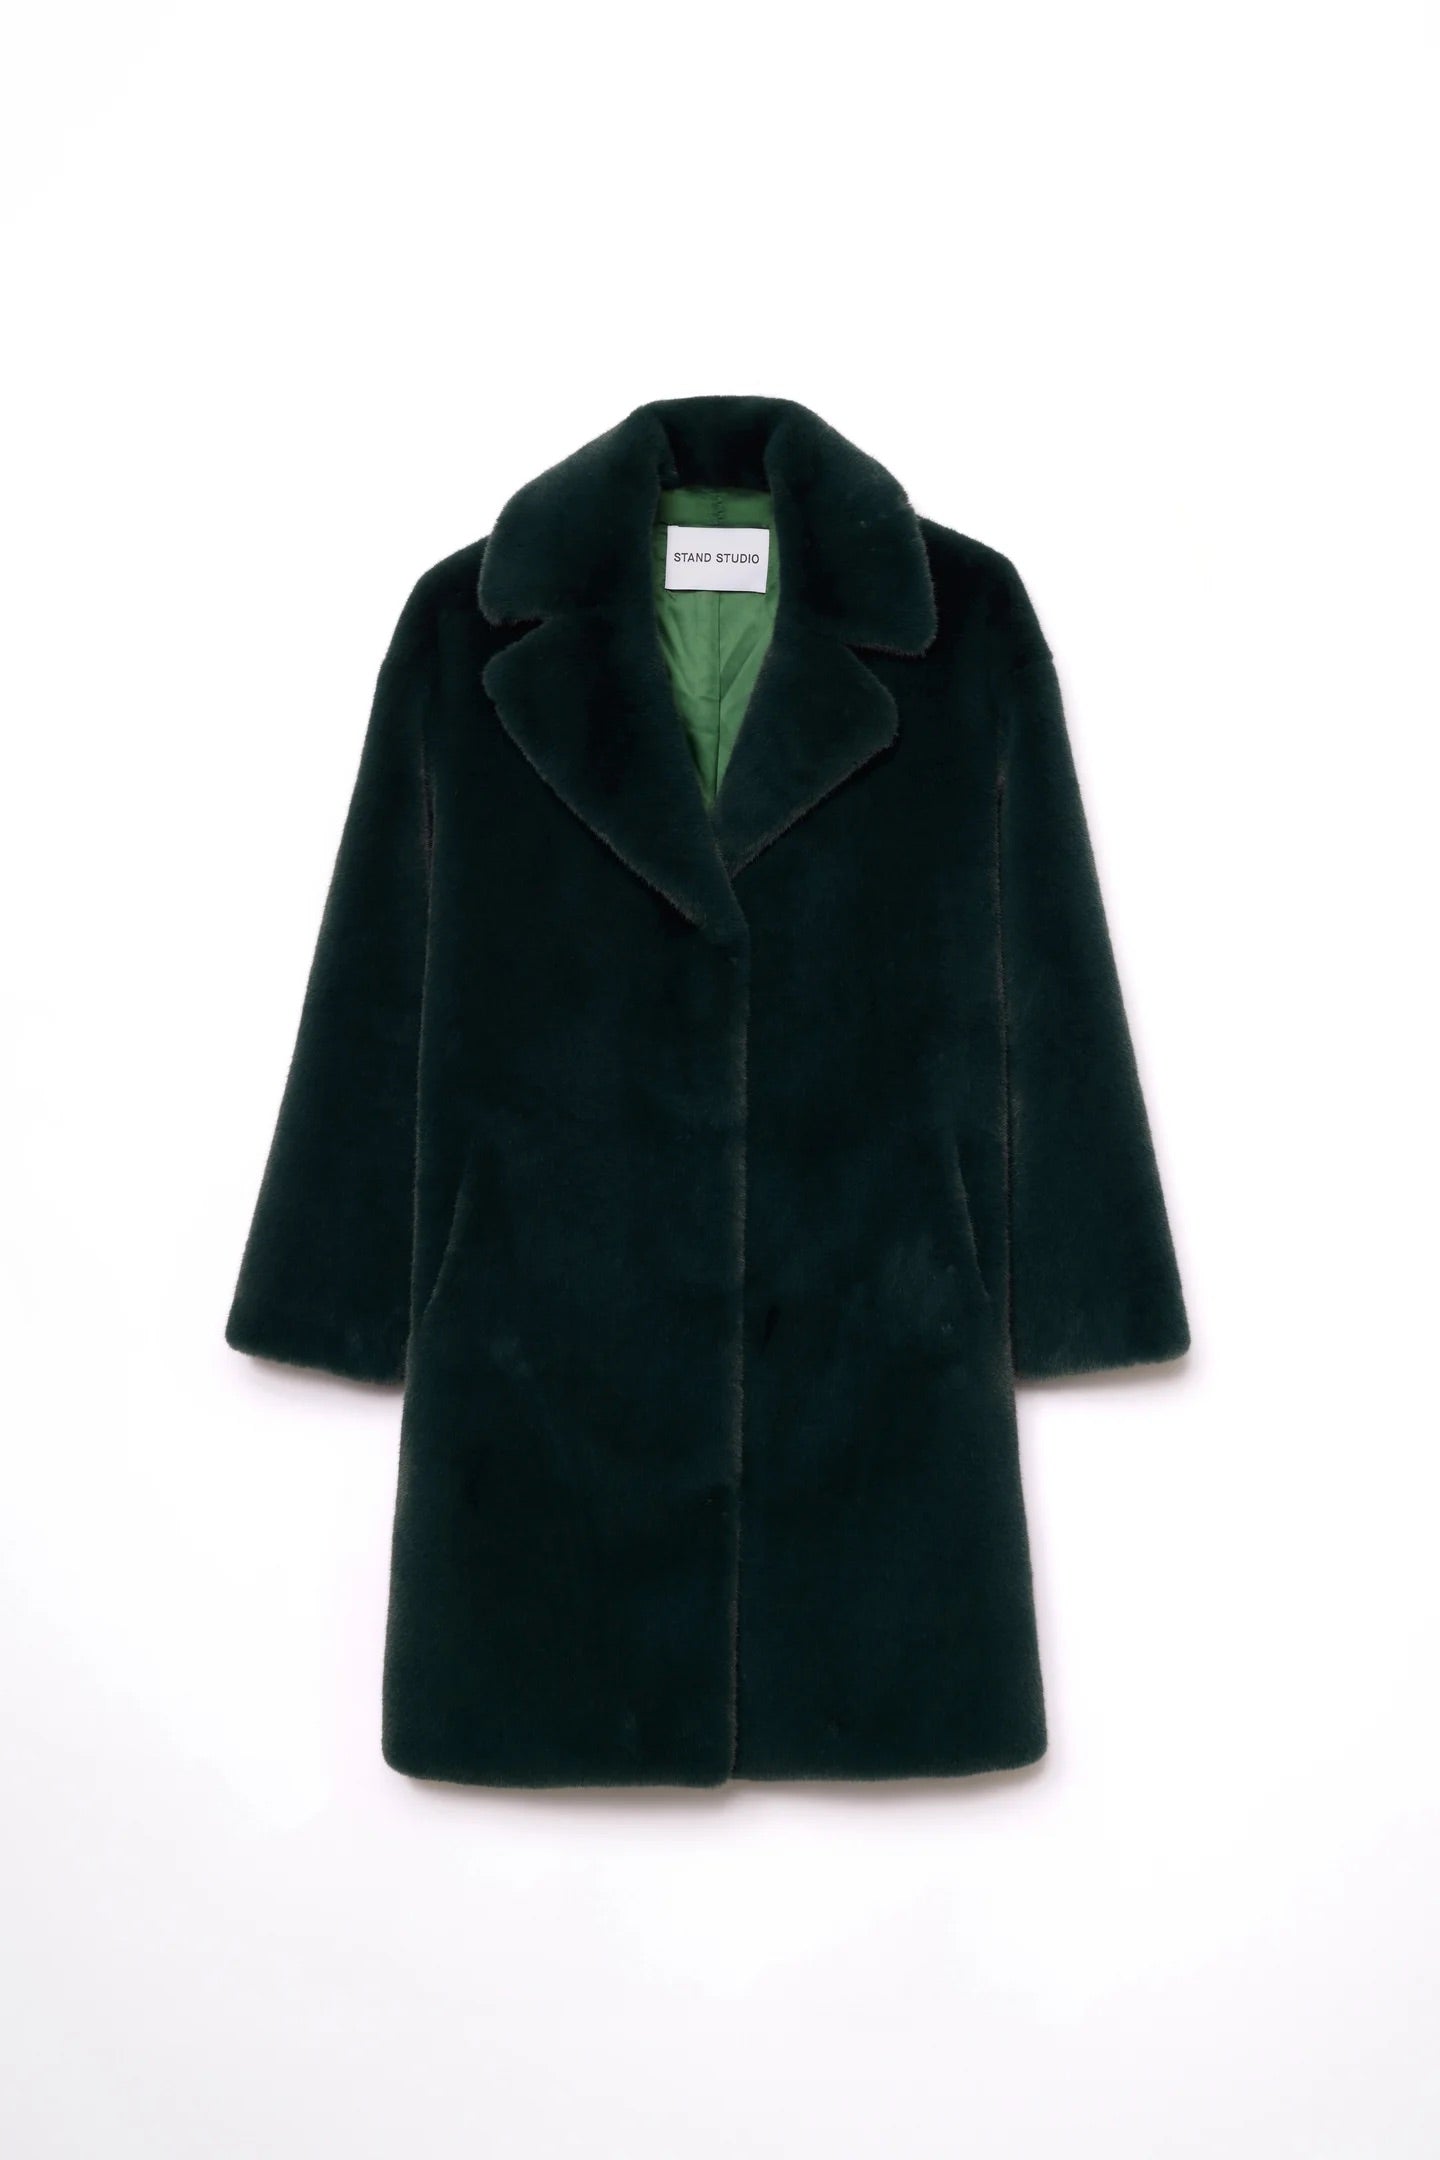 Stand Studio - Camille Cocoon Coat: Moss Green